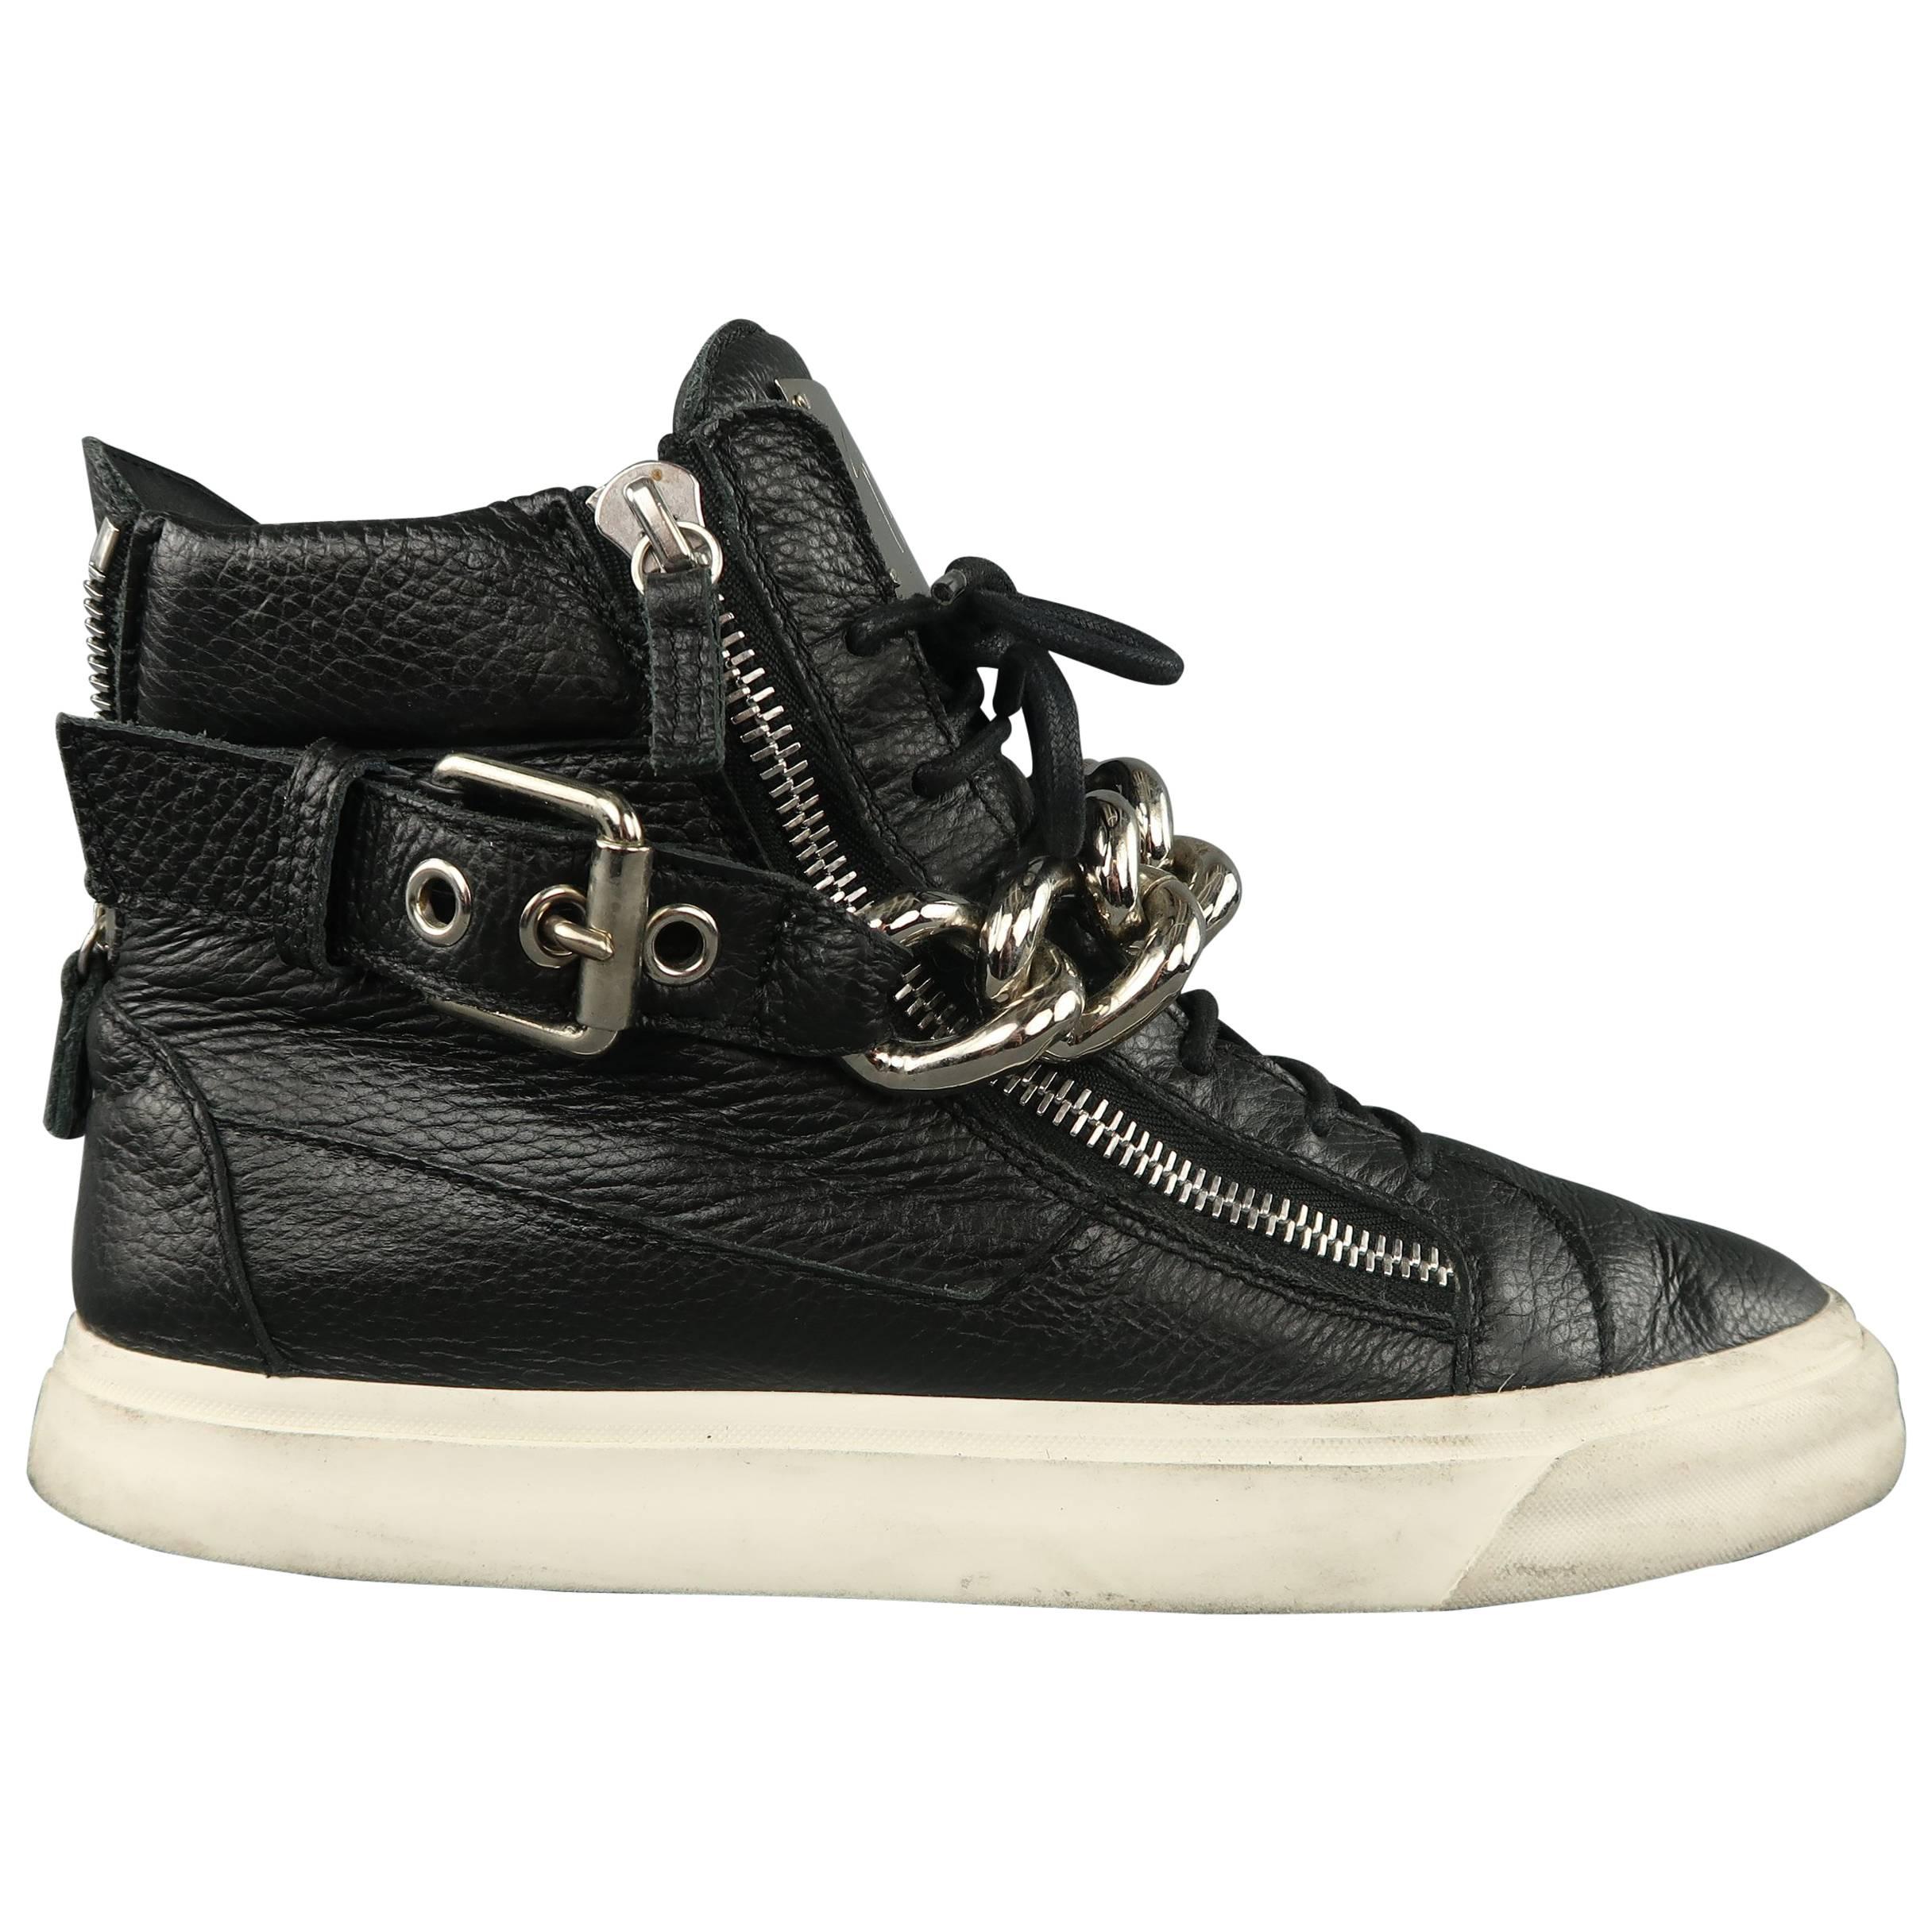 GIUSEPPE ZANOTTI Sneakers 10 Black Textured Leather Silver Chain Bangle High Top